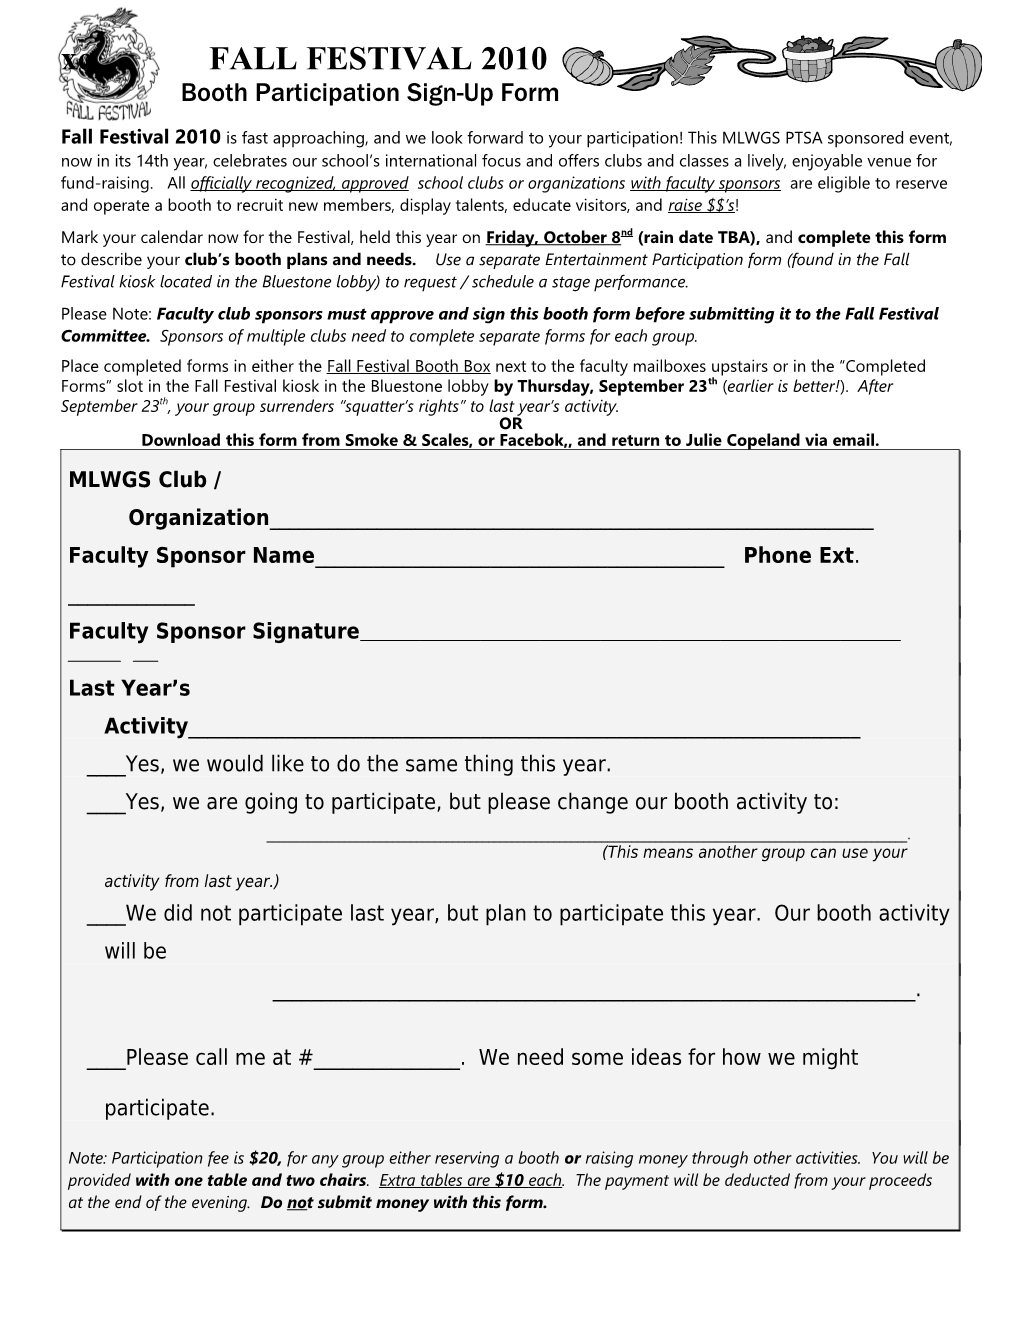 Booth Participation Sign-Up Form